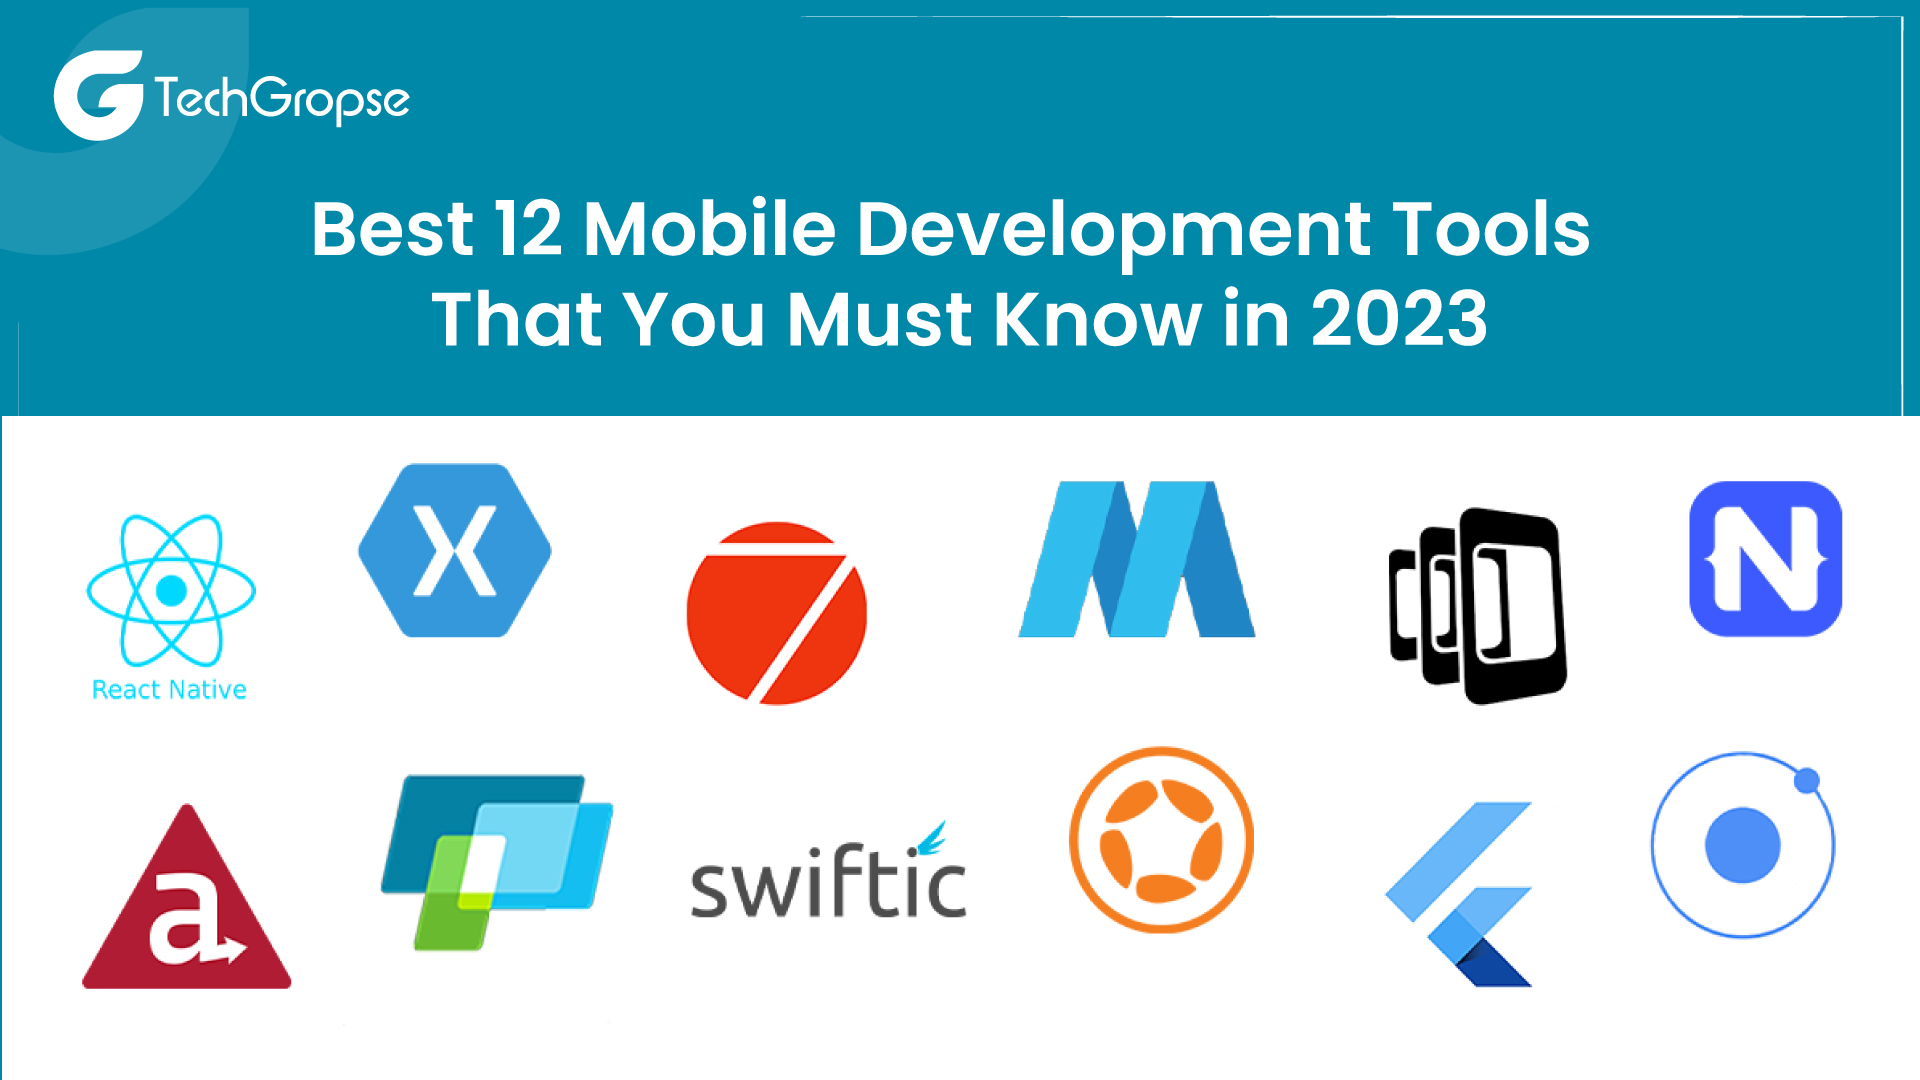 Best 12 Mobile Development Tools That You Must Know in 2023